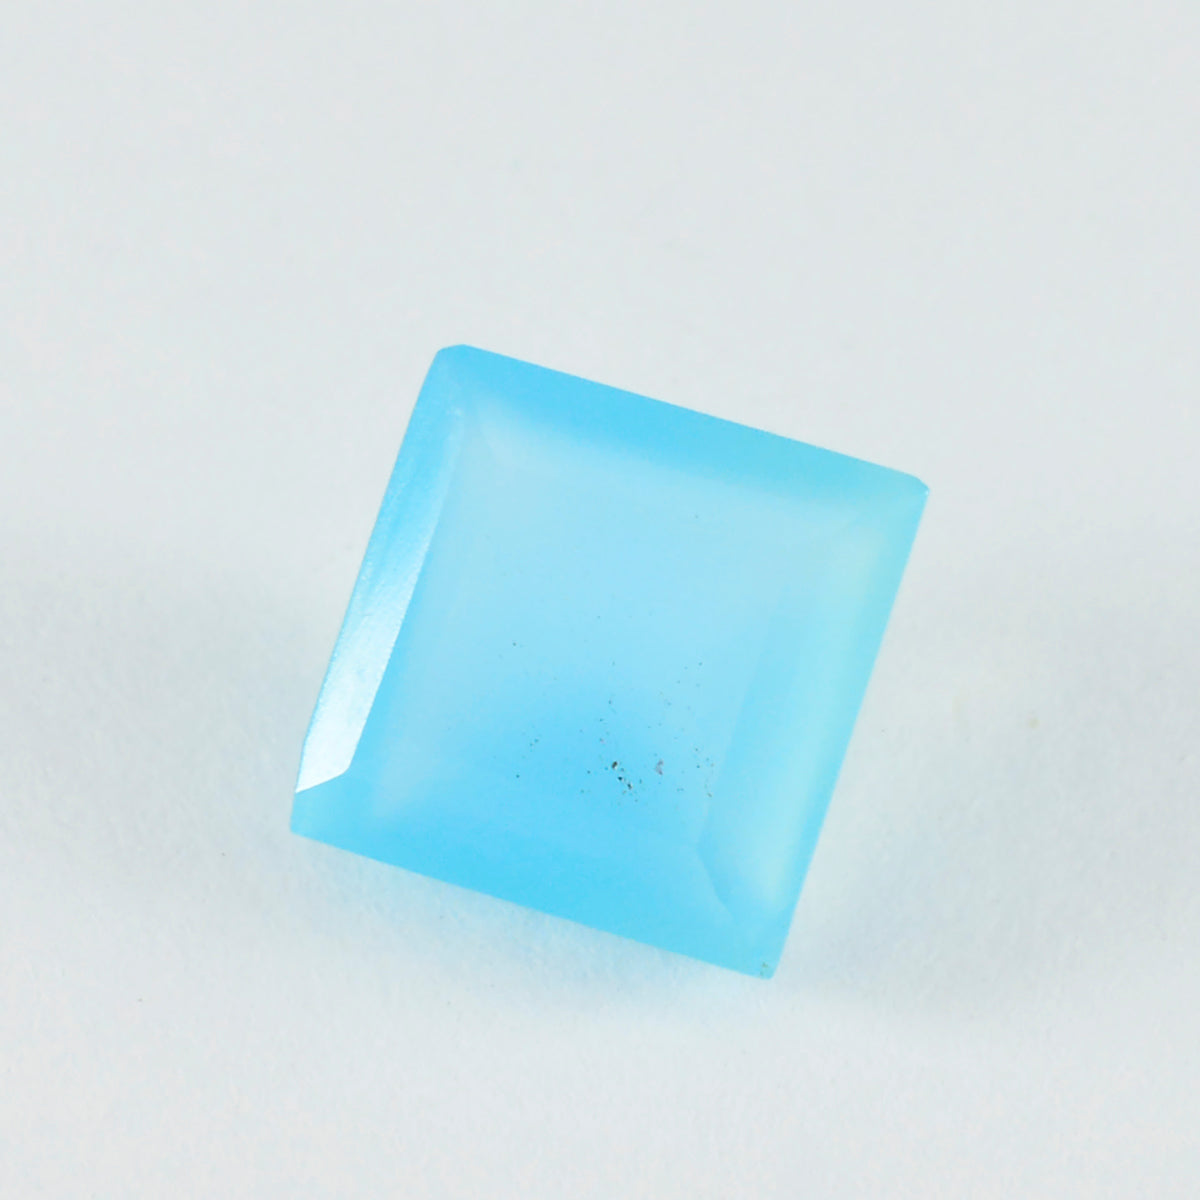 Riyogems 1PC Real Blue Chalcedony Faceted 14x14 mm Square Shape good-looking Quality Loose Gem